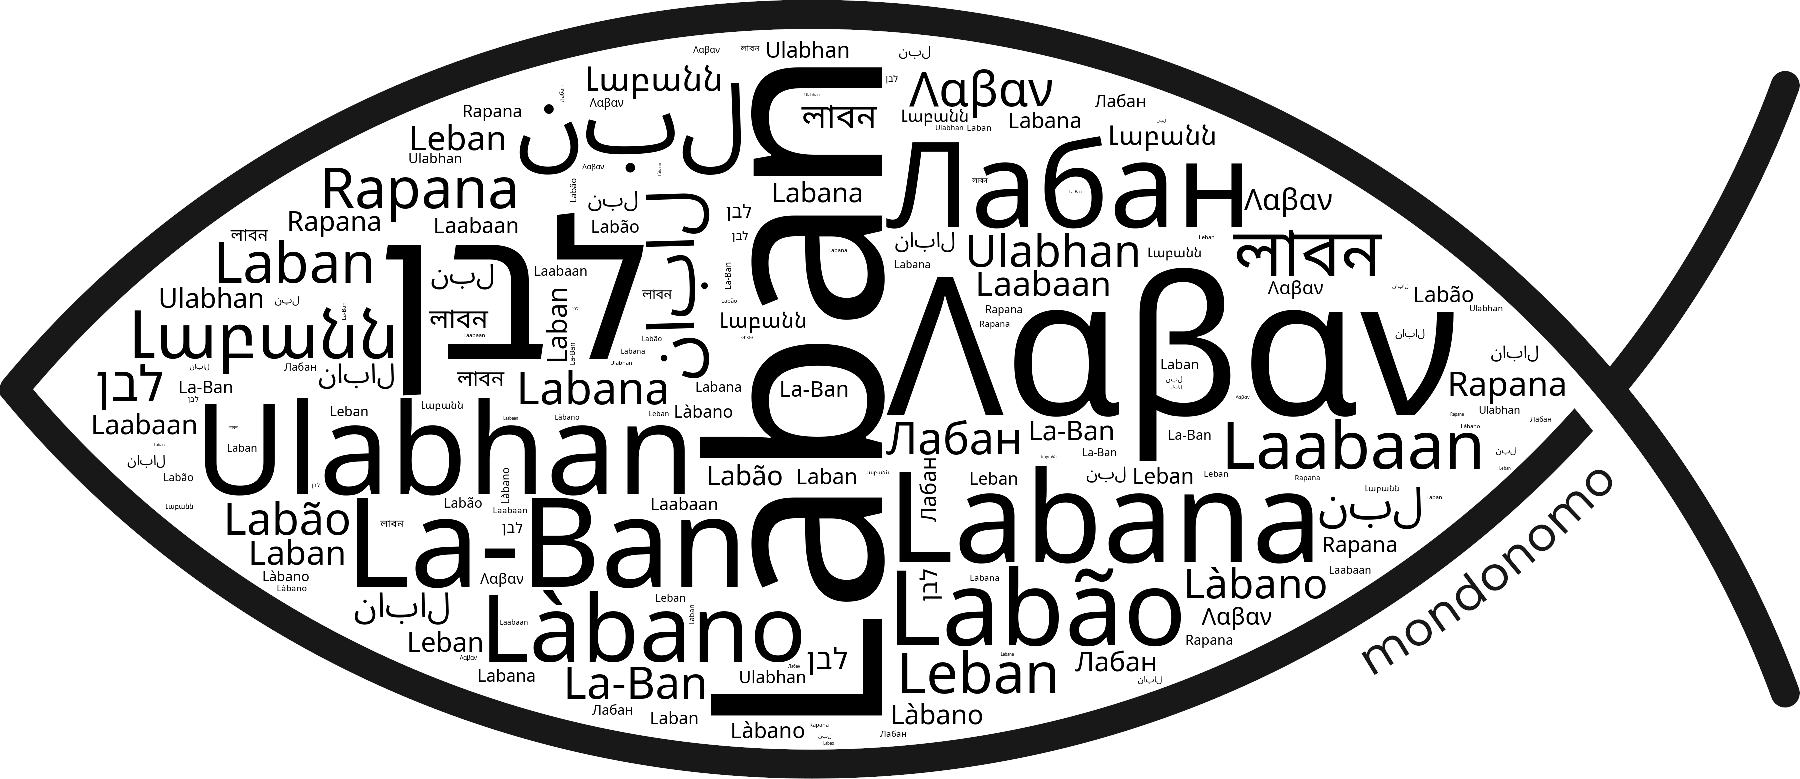 Name Laban in the world's Bibles